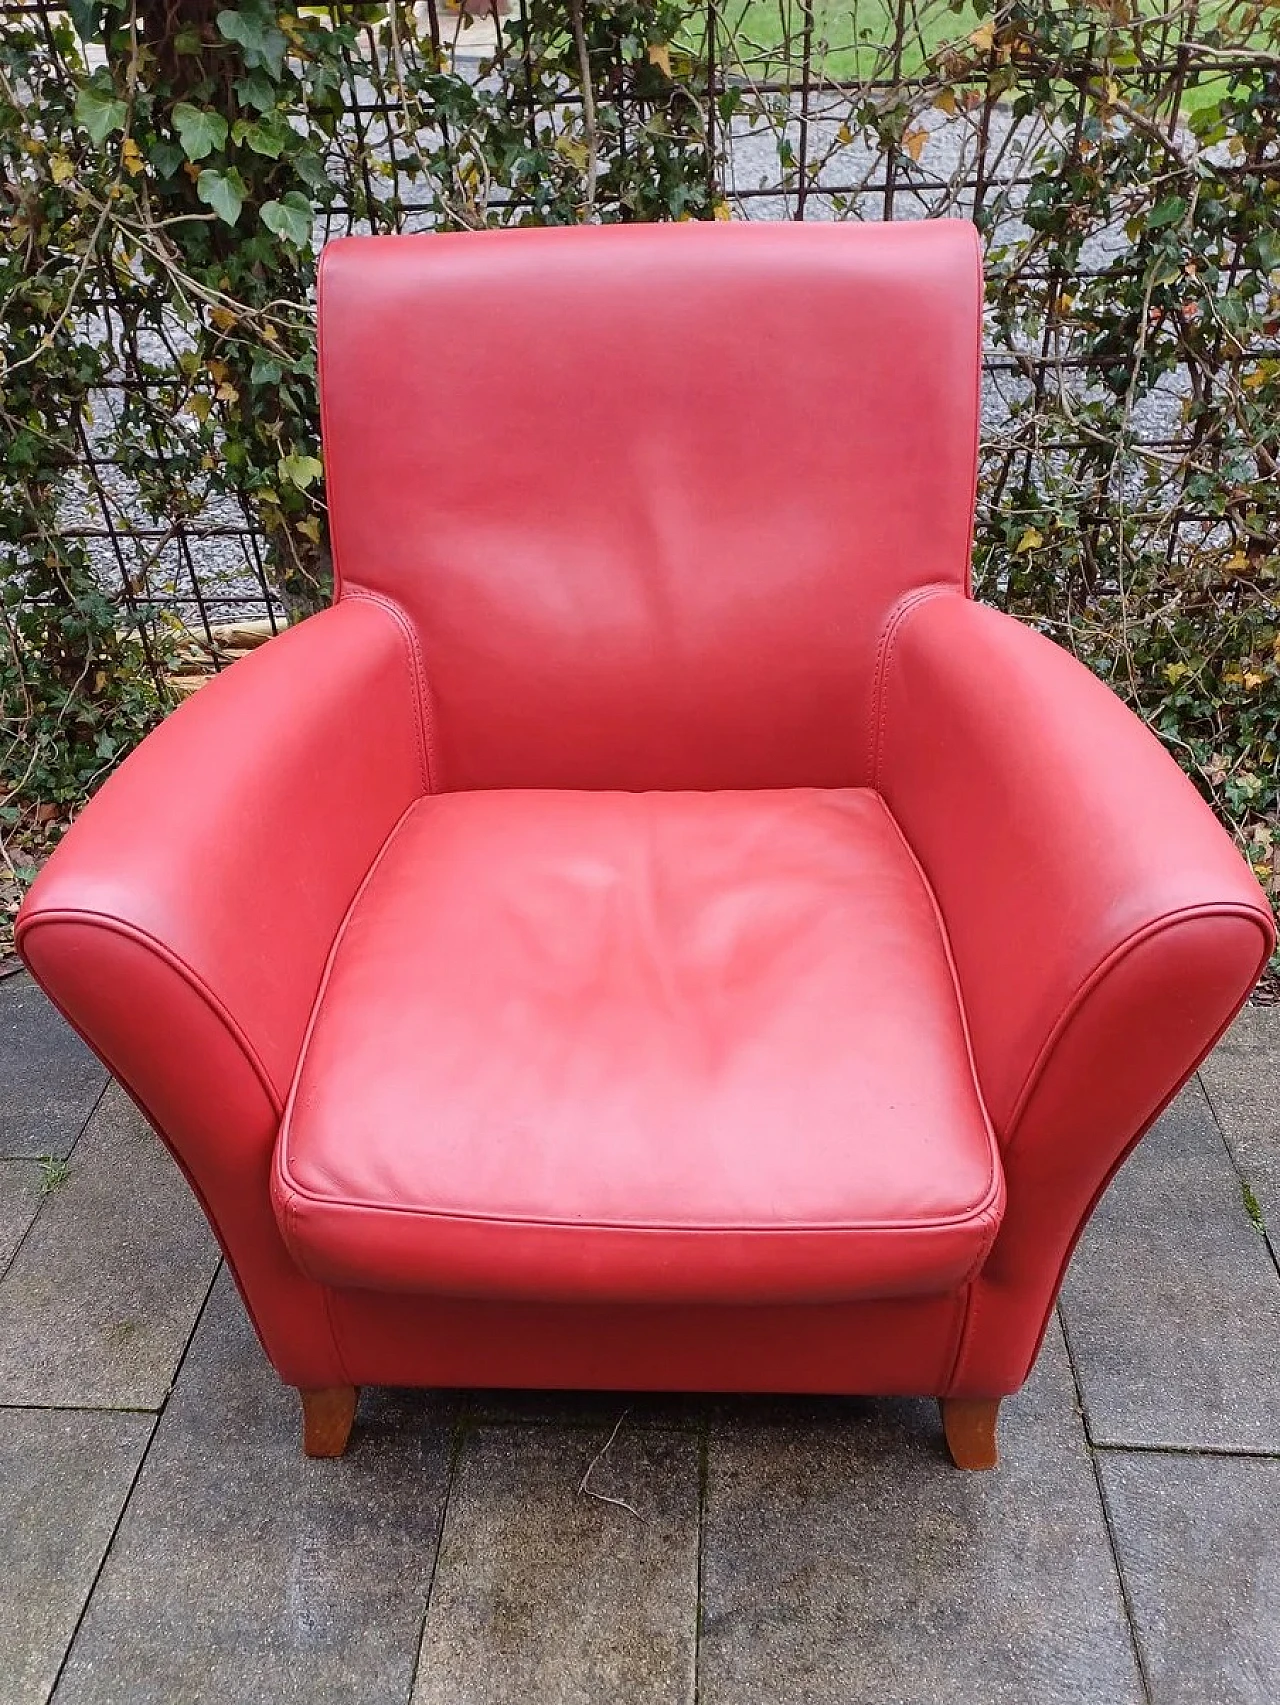 Oxford Club armchair in red leather by C.P. Baxter, 2000s 1